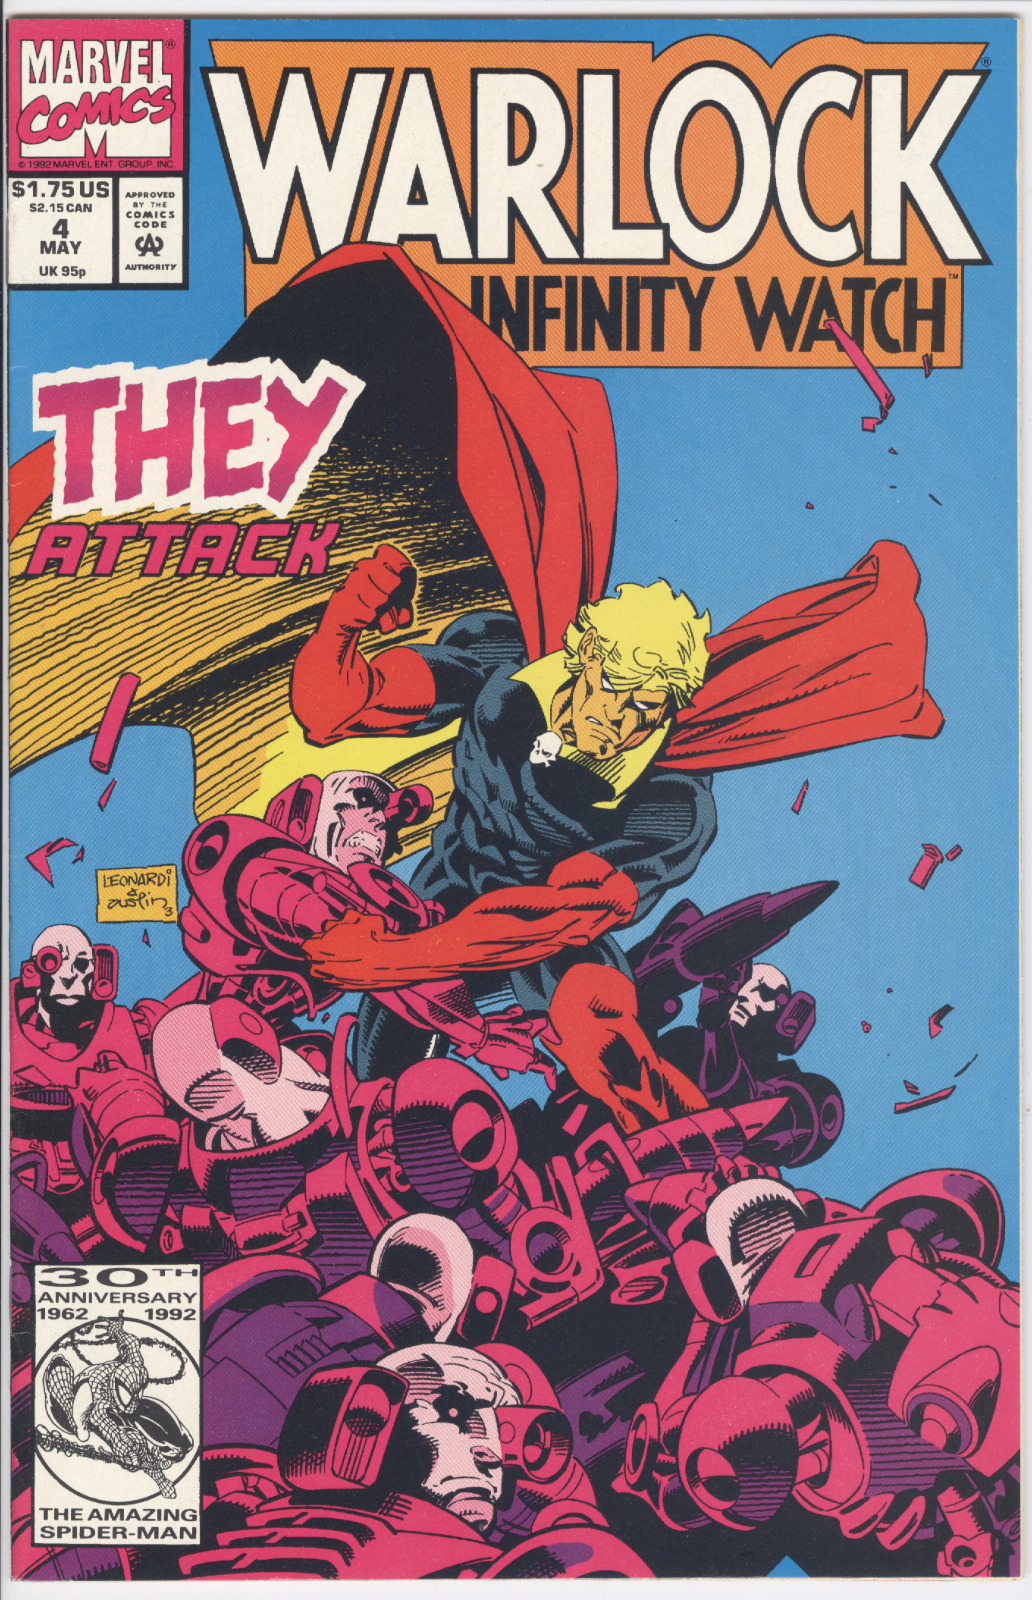 WARLOCK INFINITY WATCH #4 MARVEL featuring they attack VG/FINE or better